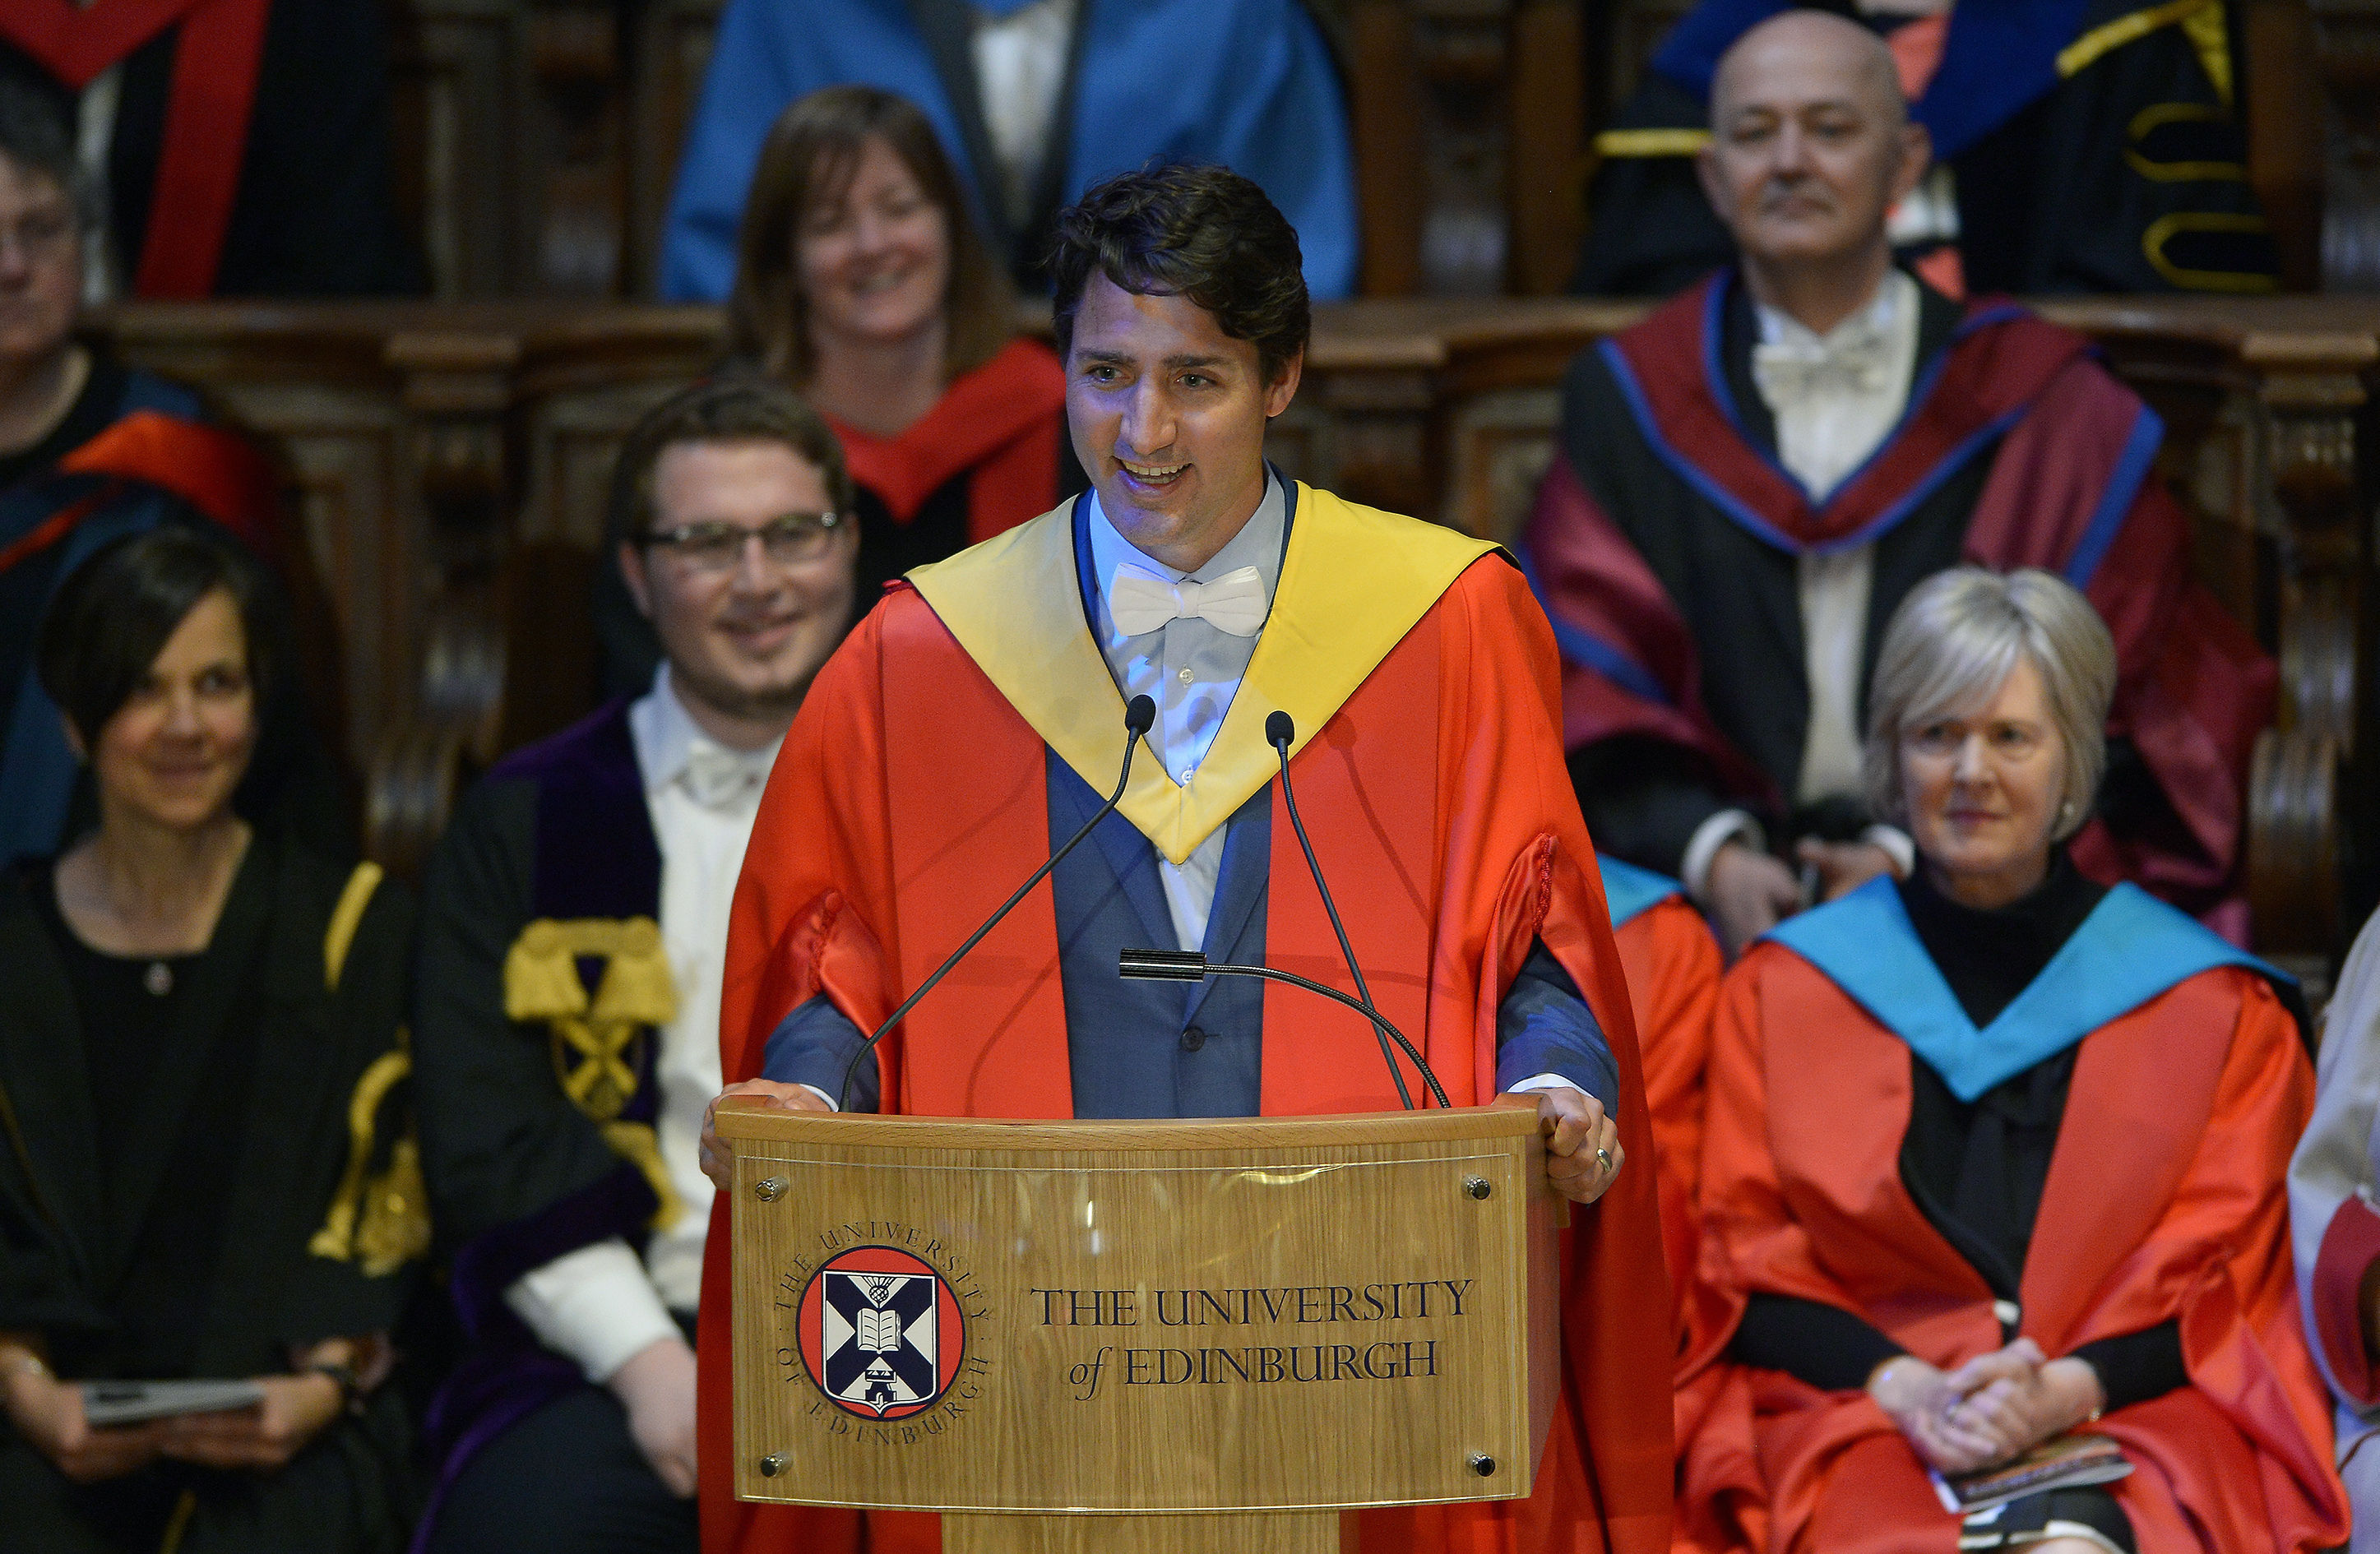 Canadian Prime Minister Justin Trudeau who has received an honorary degree. (Neil Hanna/University of Edinburgh/PA Wire)